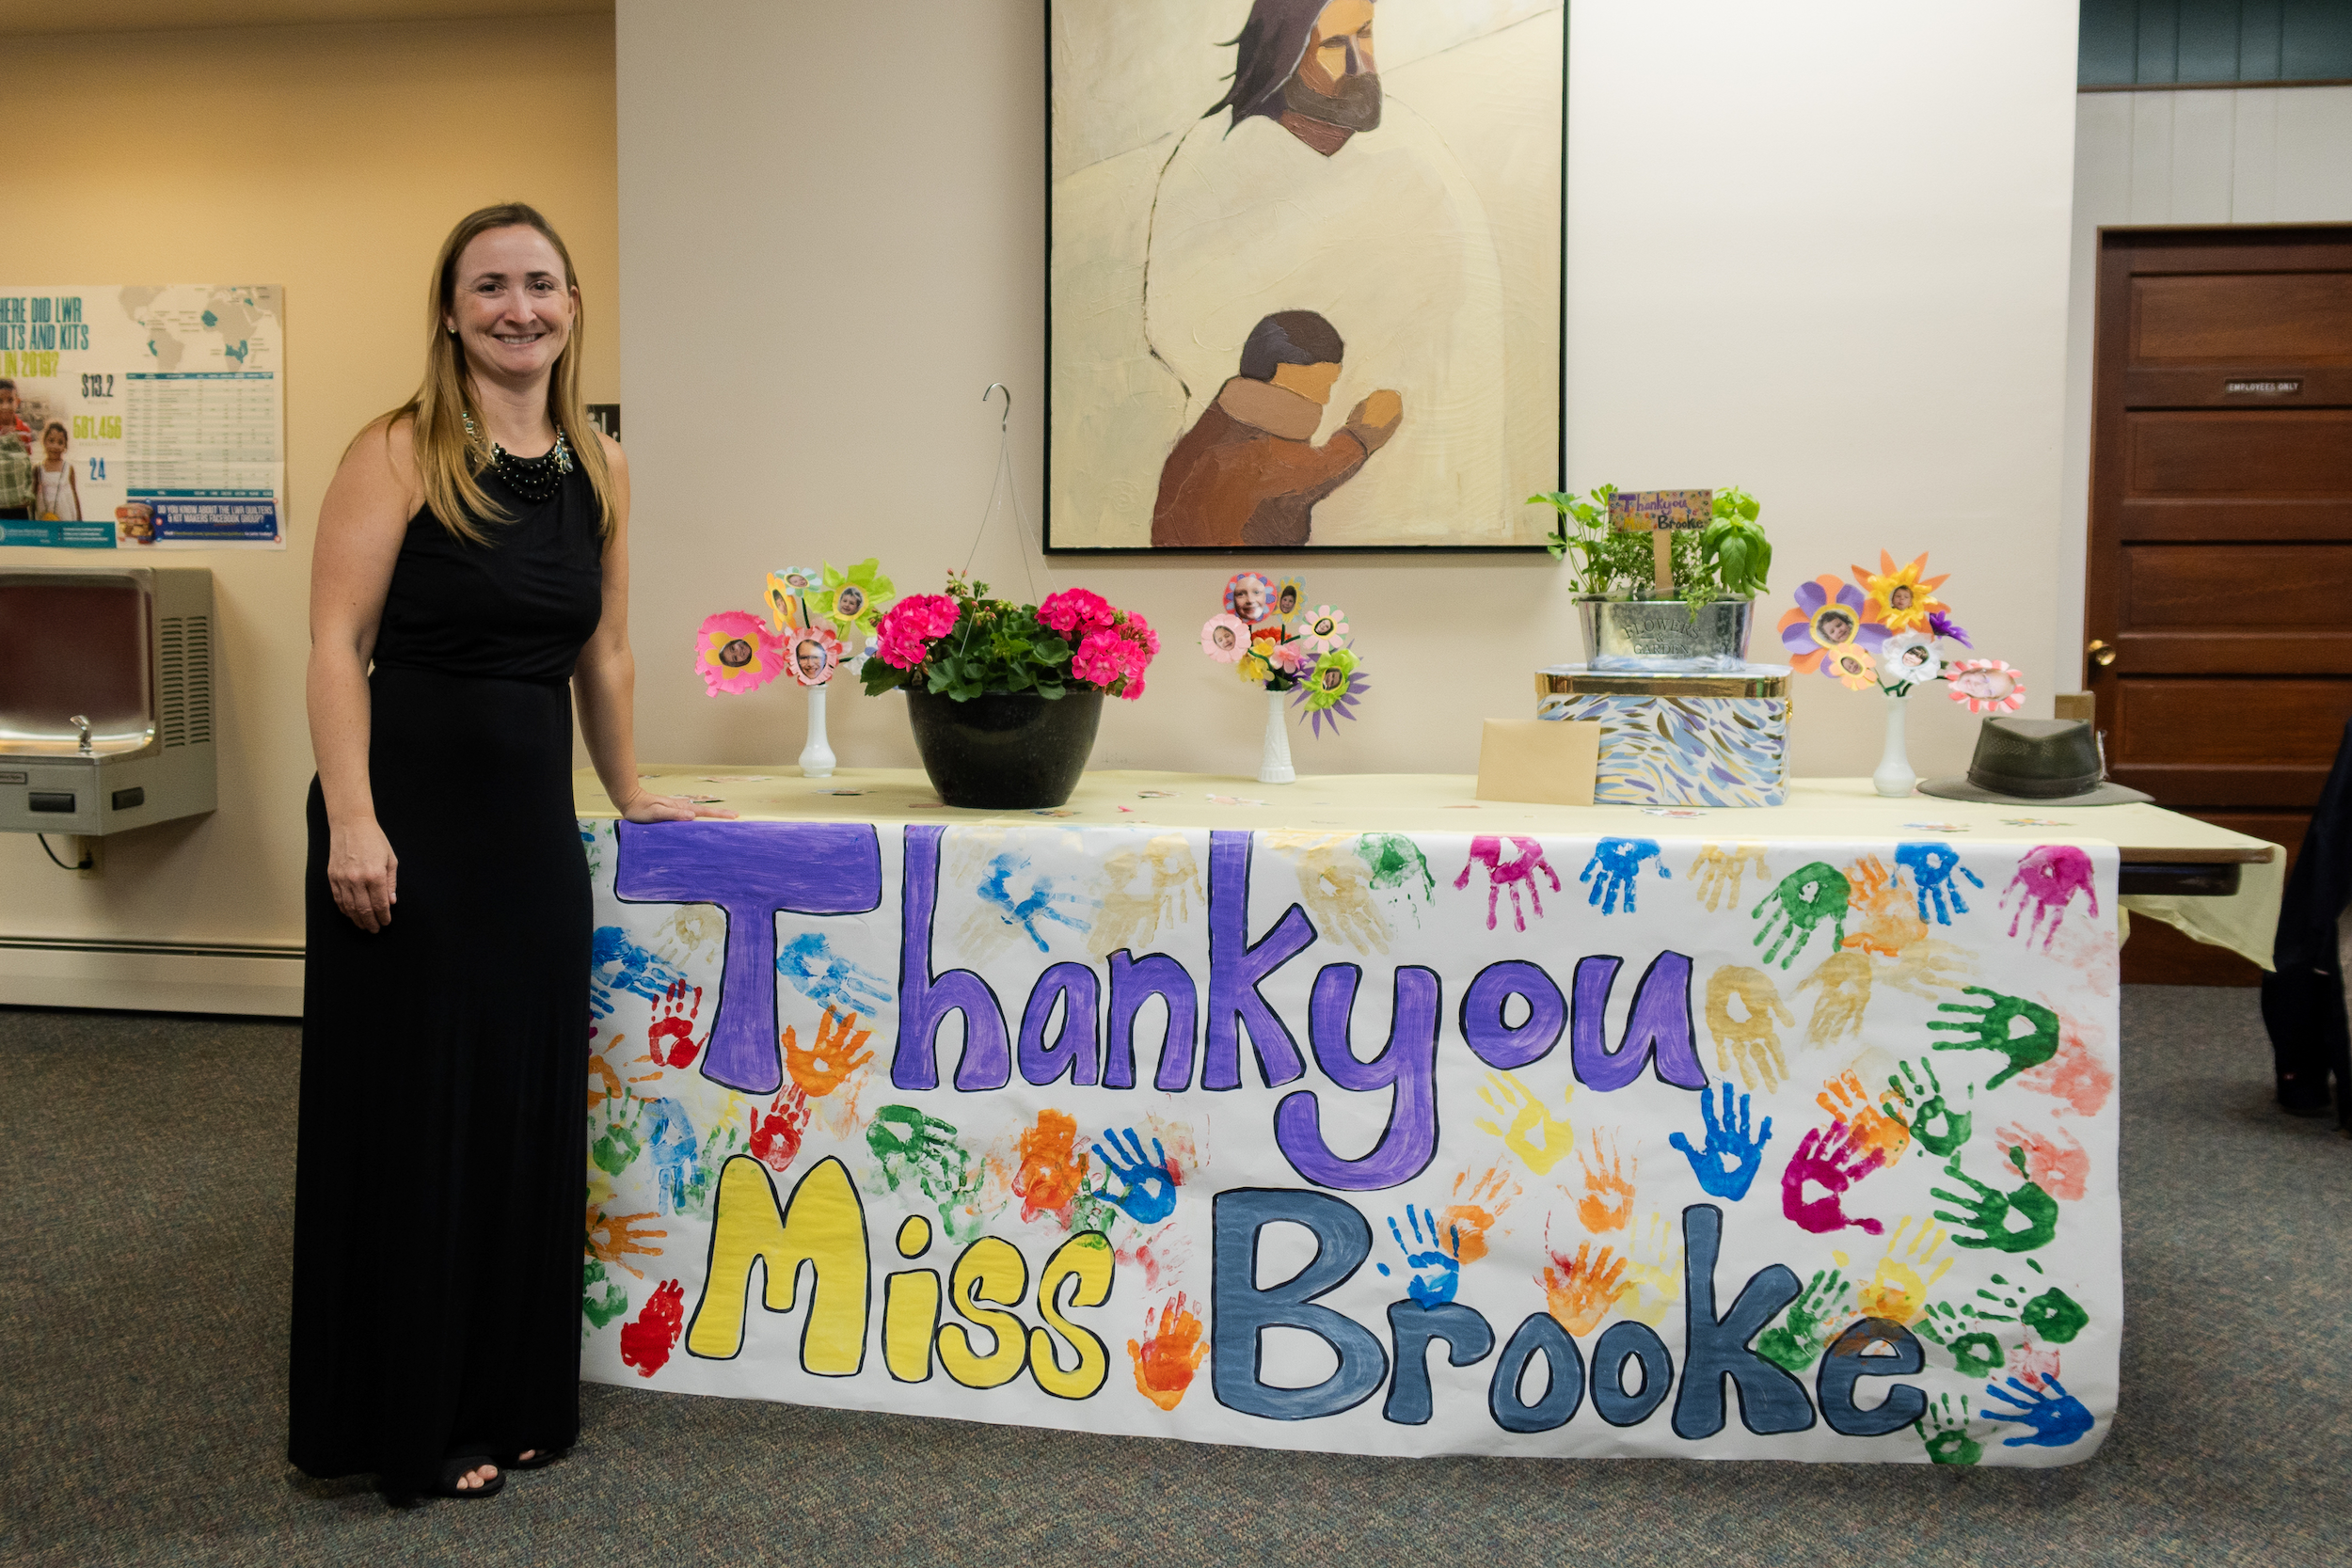 We are so grateful to Brooke Prins for her years of service to our Sunday School youth!